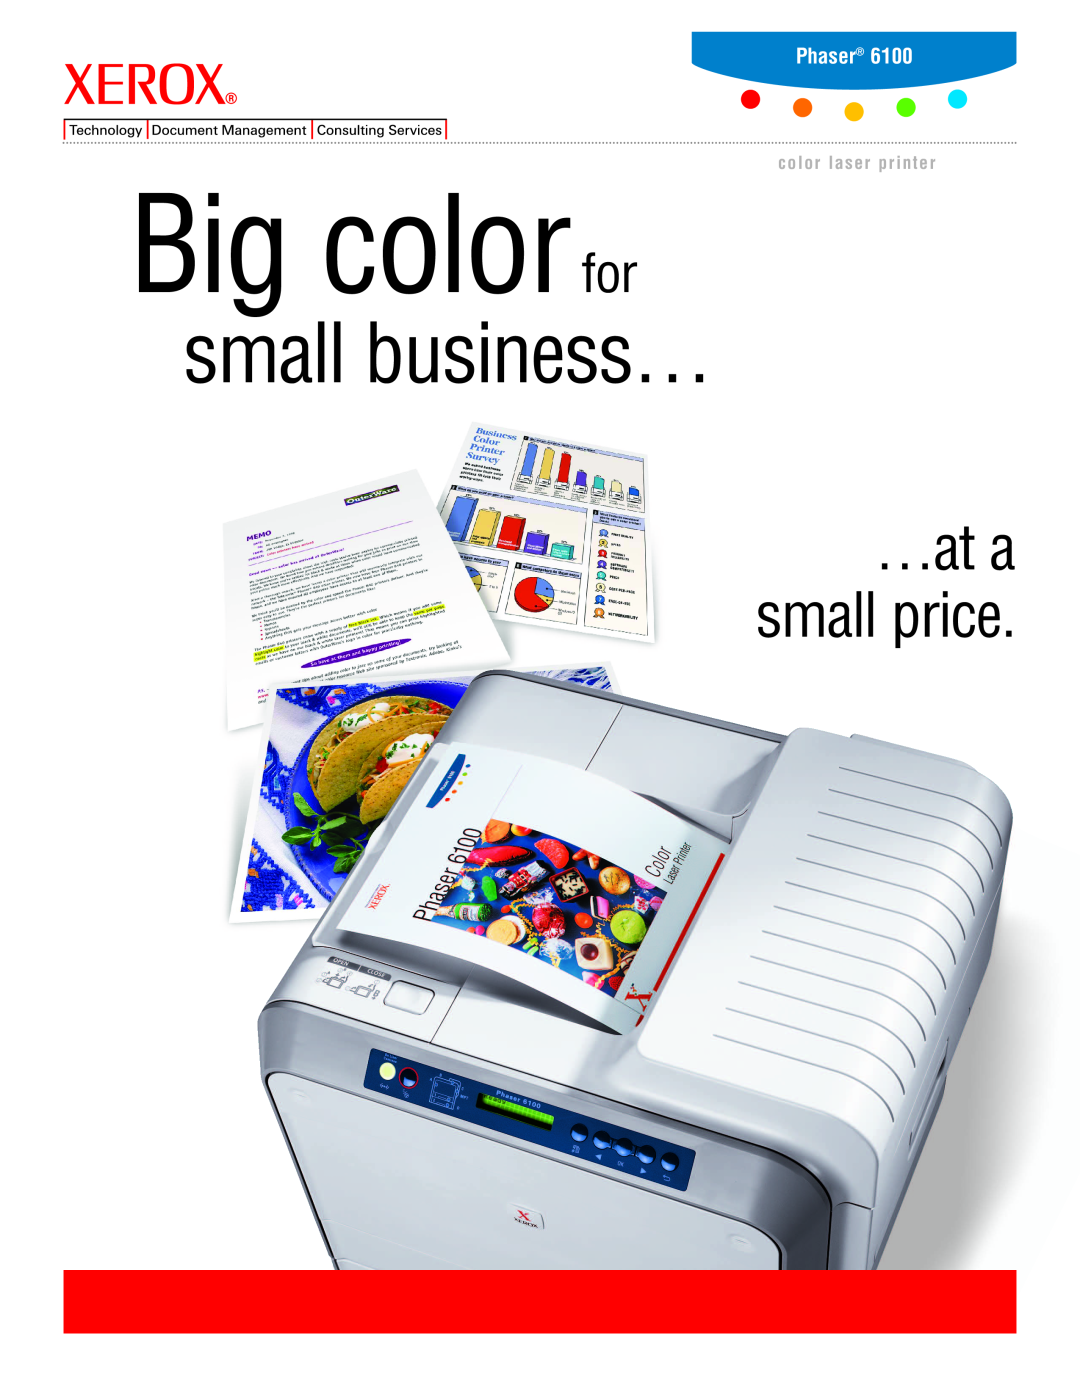 Xerox 6100DN manual Phaser, Big colorfor, small business…, …at a small price, color laser printer 